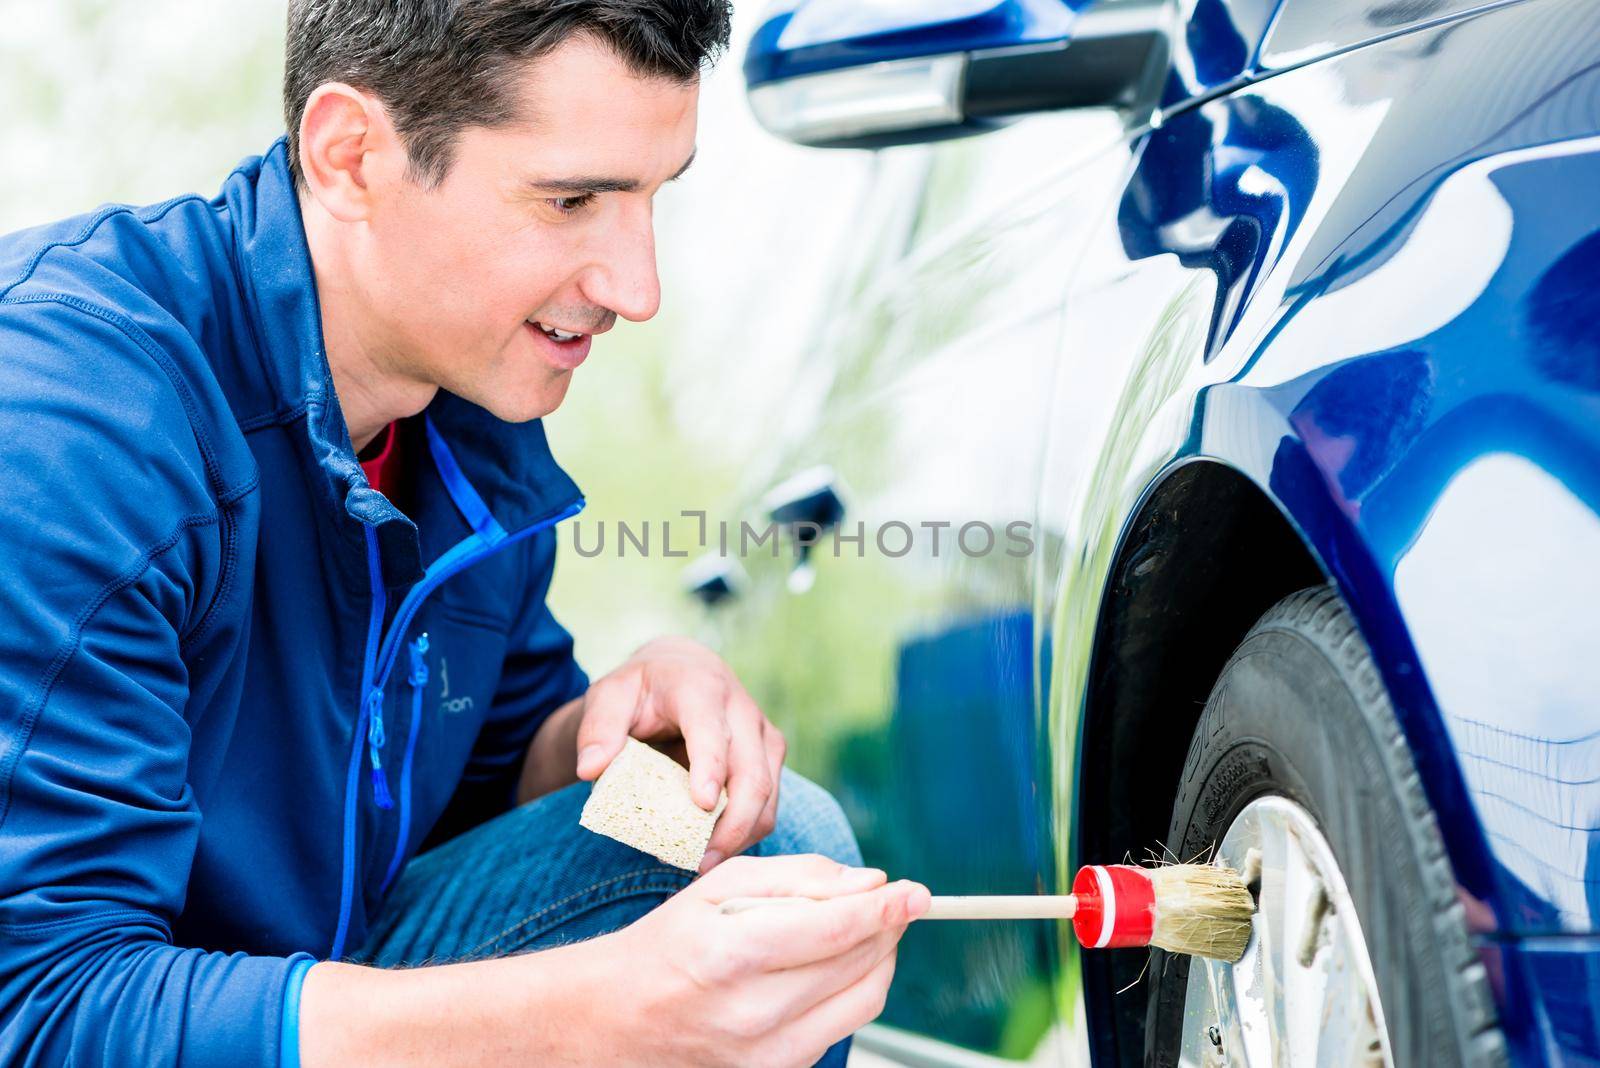 Smiling attractive man cleaning the alloy hubs on his car tyres using a soft bristle brush and soap